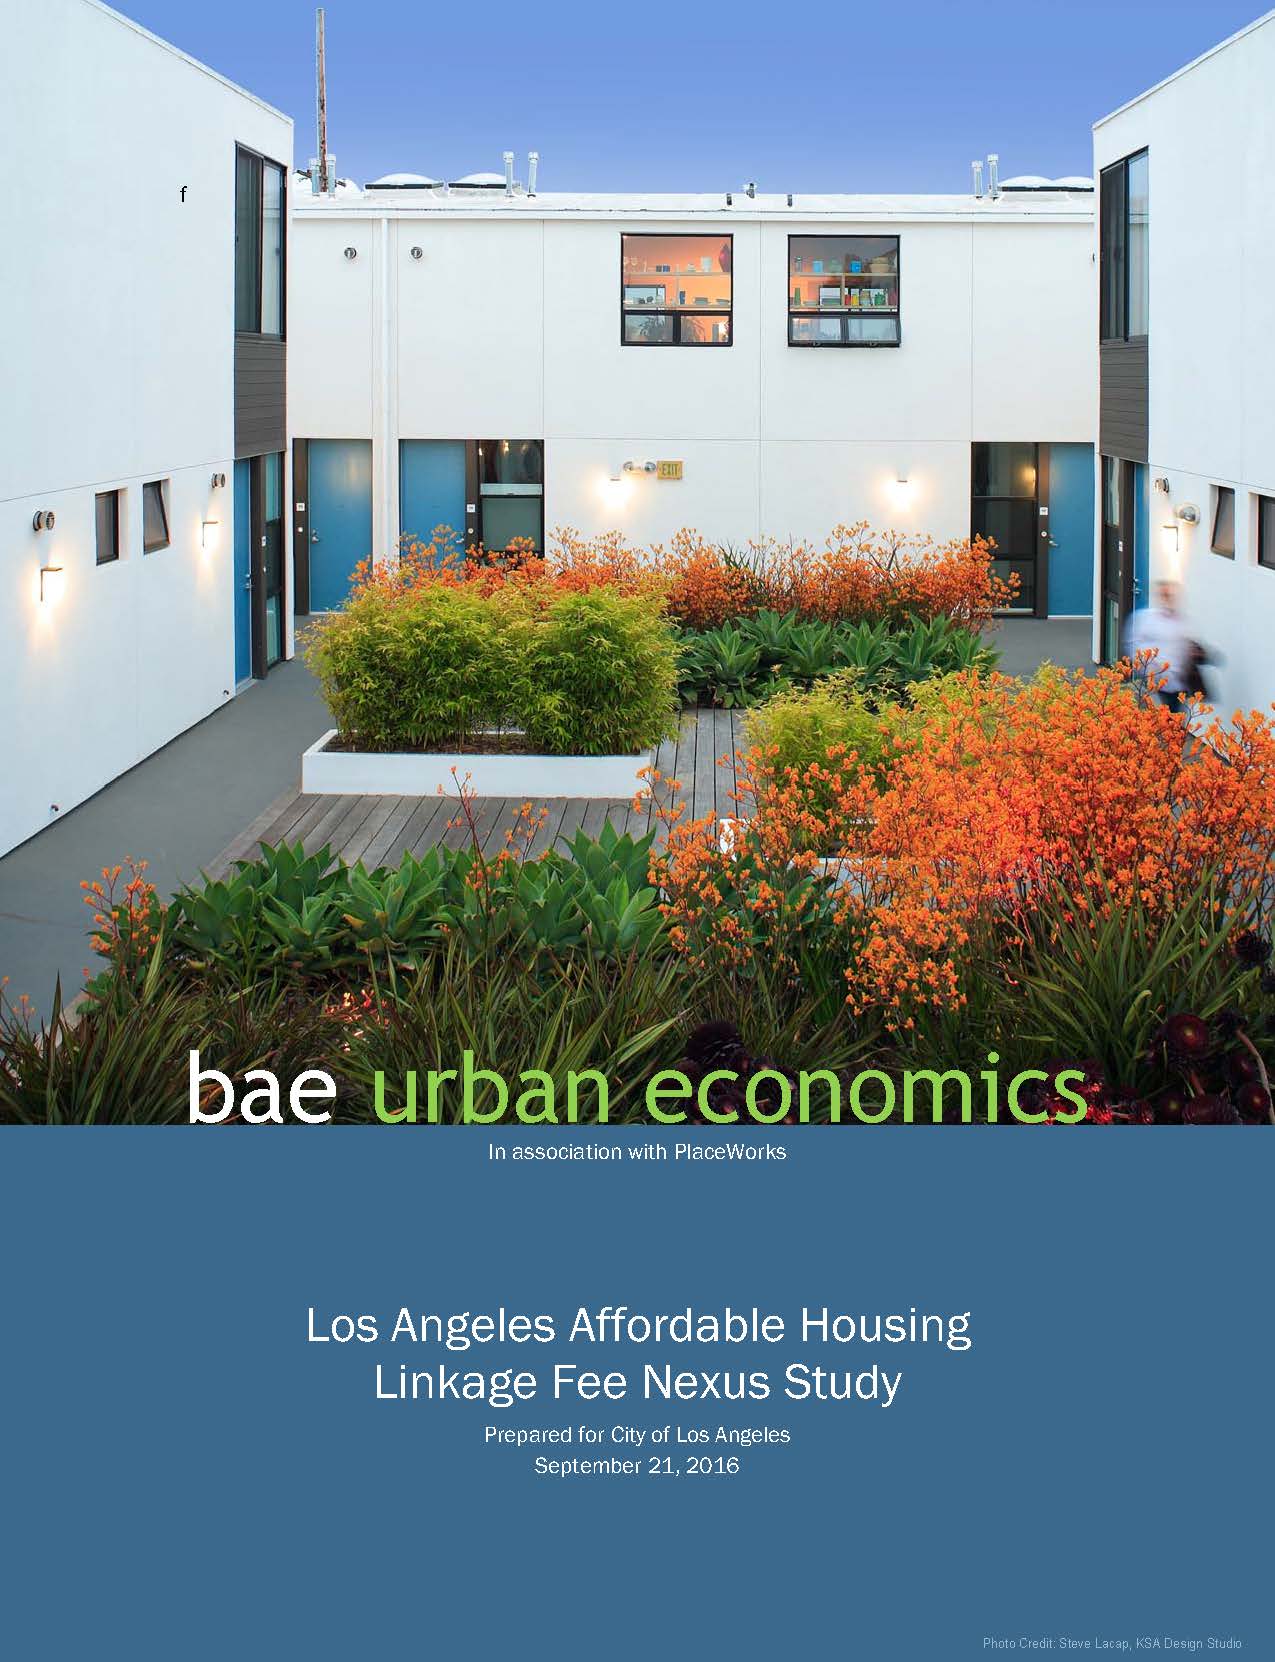 City of Los Angeles Affordable Housing Linkage Fee Study